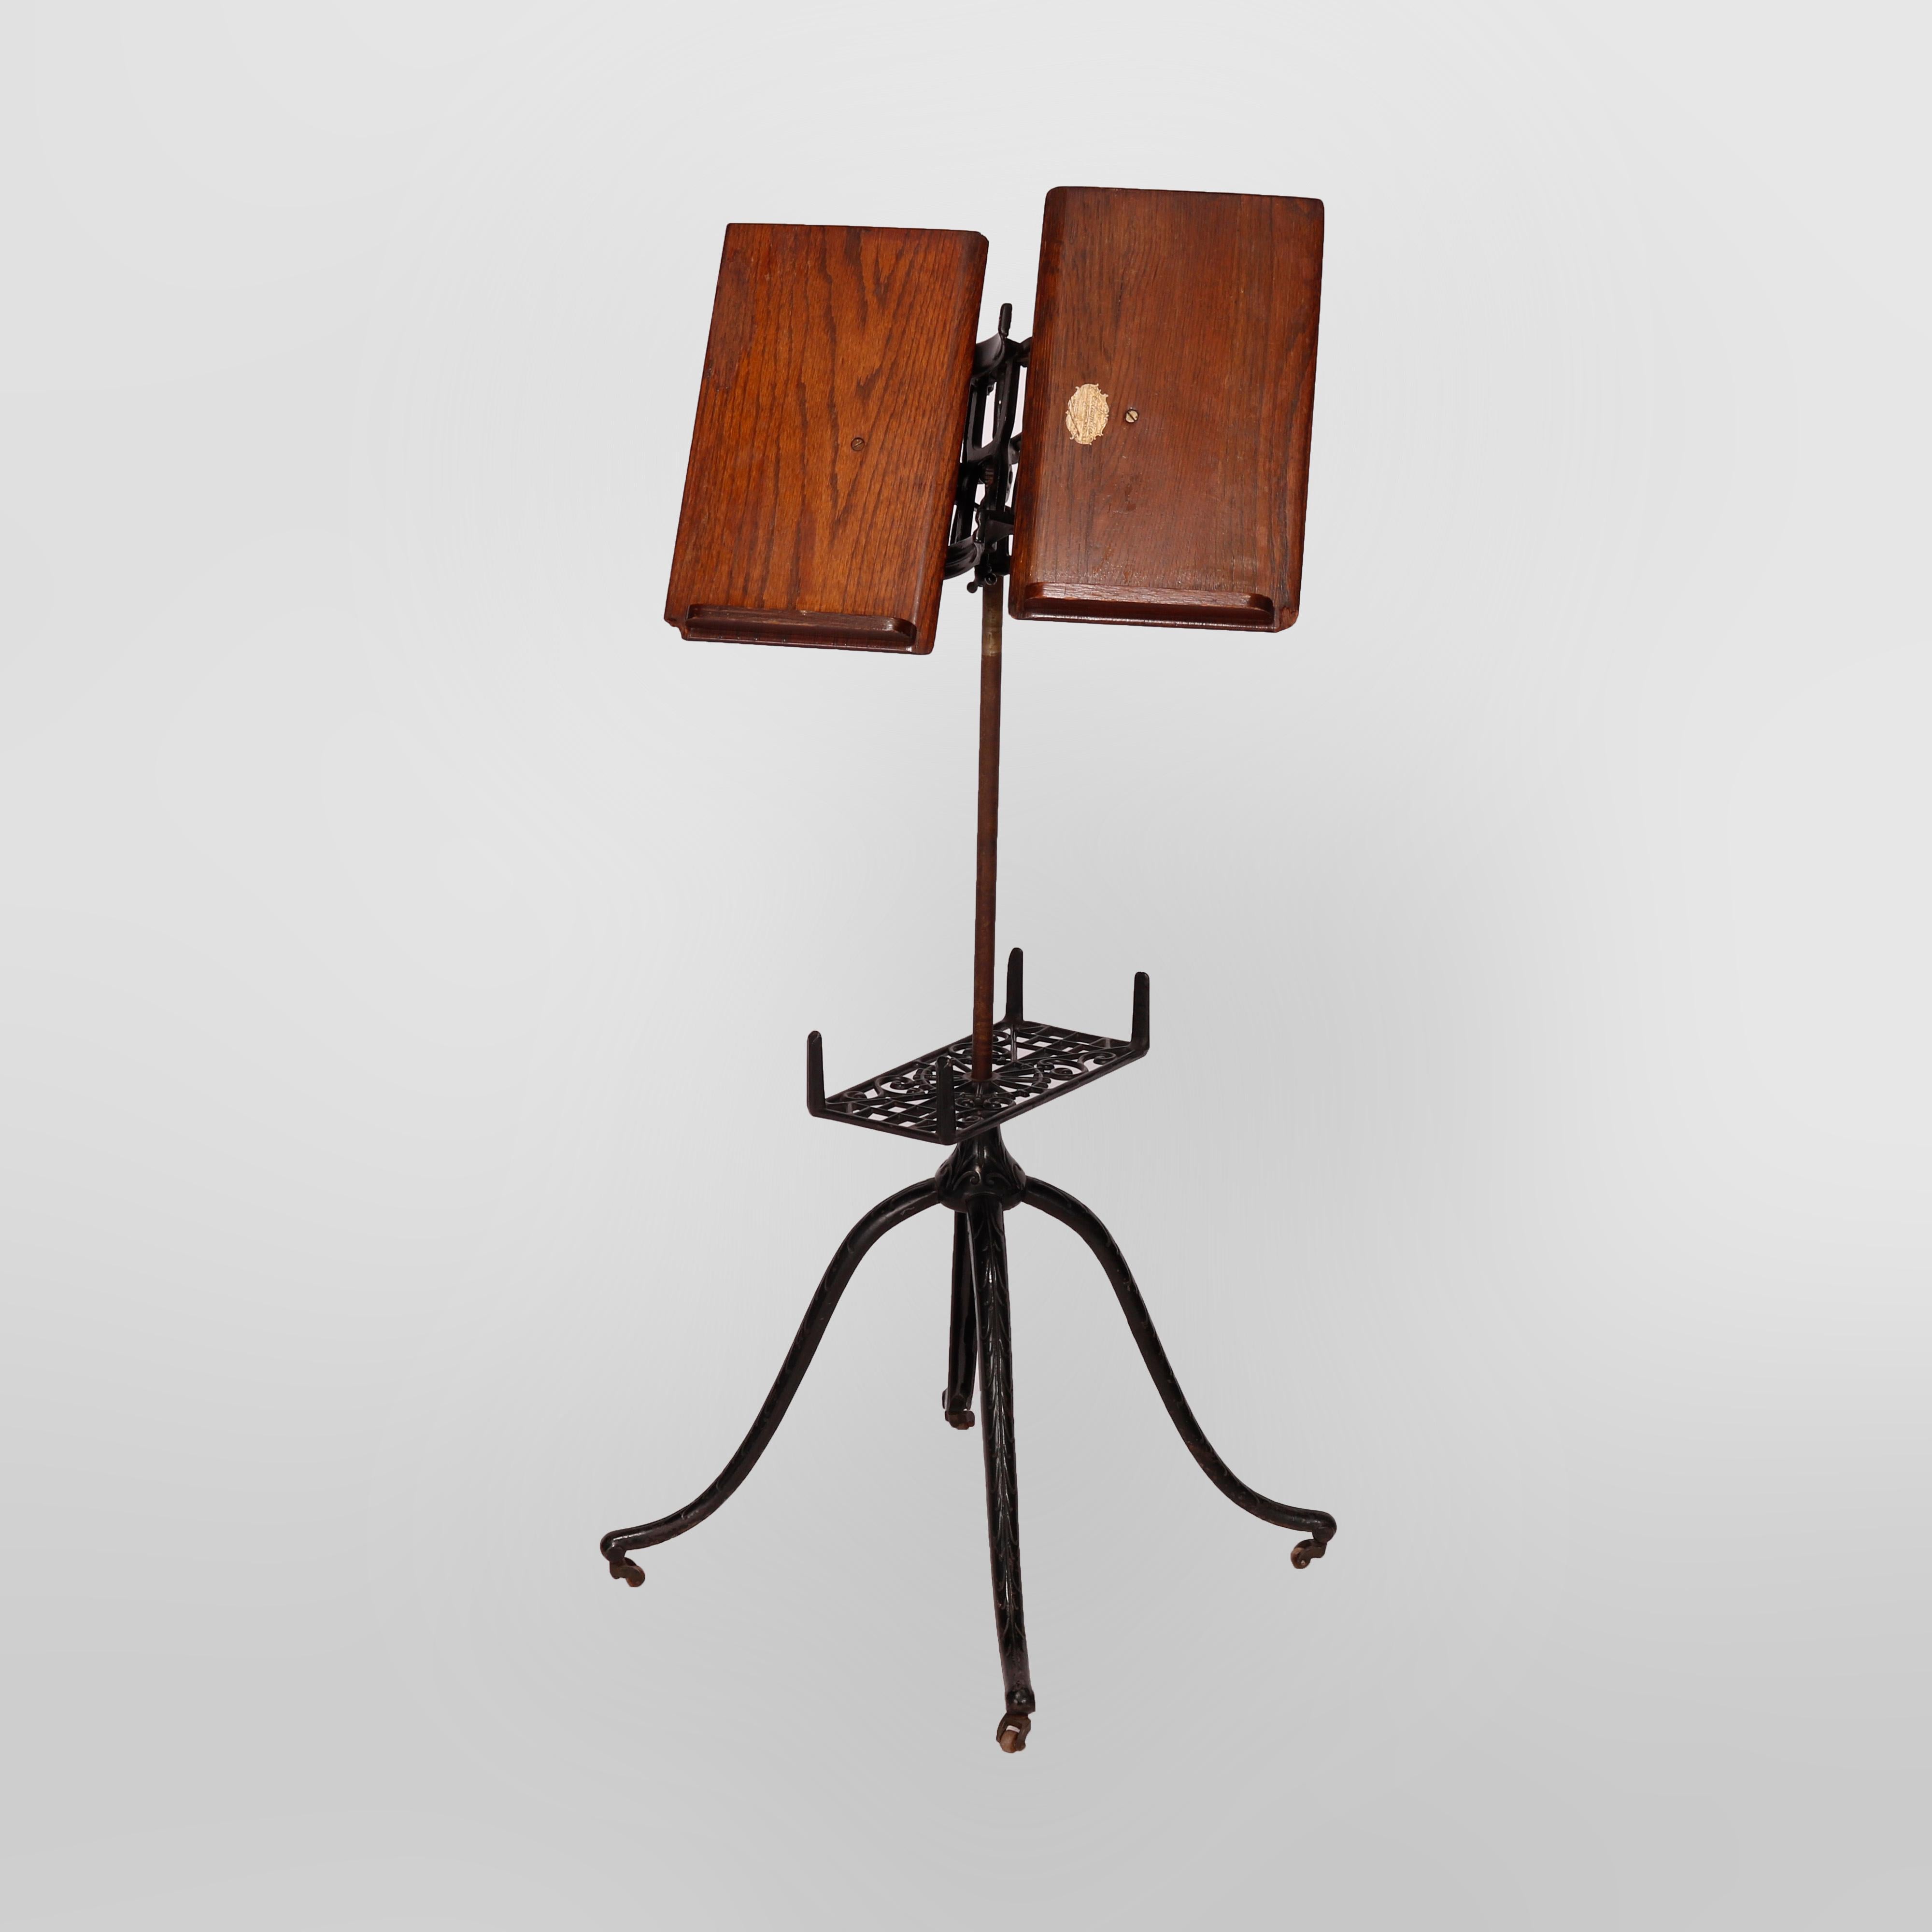 An antique Arts & Crafts library or parlor dictionary book stand by Columbia offers cast iron quadripod base with cabriole legs and pierced cast foliate lower shelf surmounted by adjustable display, seated on casters, maker label as photographed,